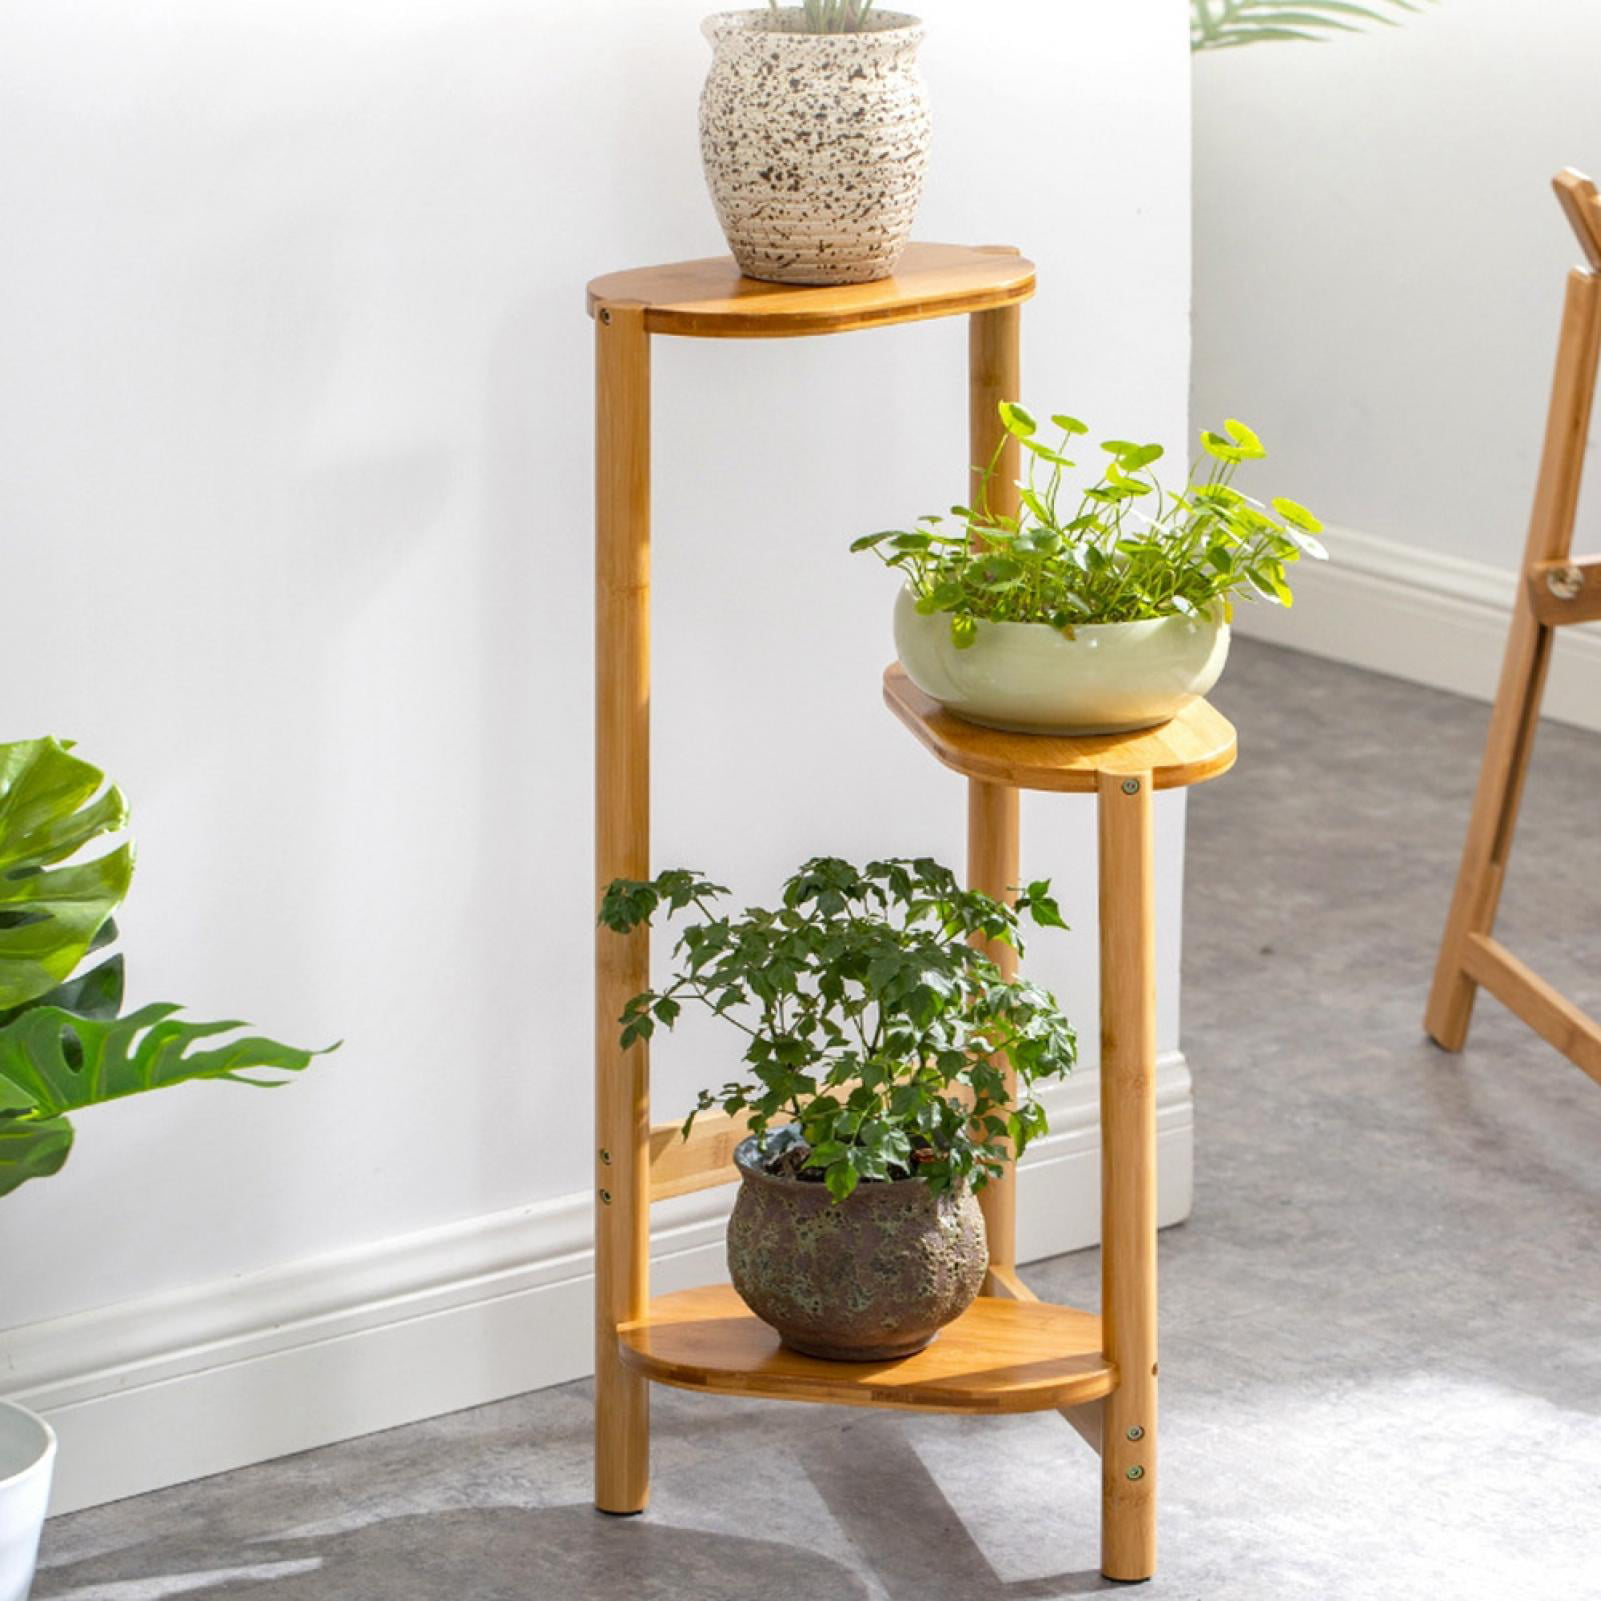 Portable 2-Tier Bamboo Plant Flower Stand Rack Corner Tall Plant Bench Folding Small Space Plants Display Shelf Organizer for Indoor Home Office